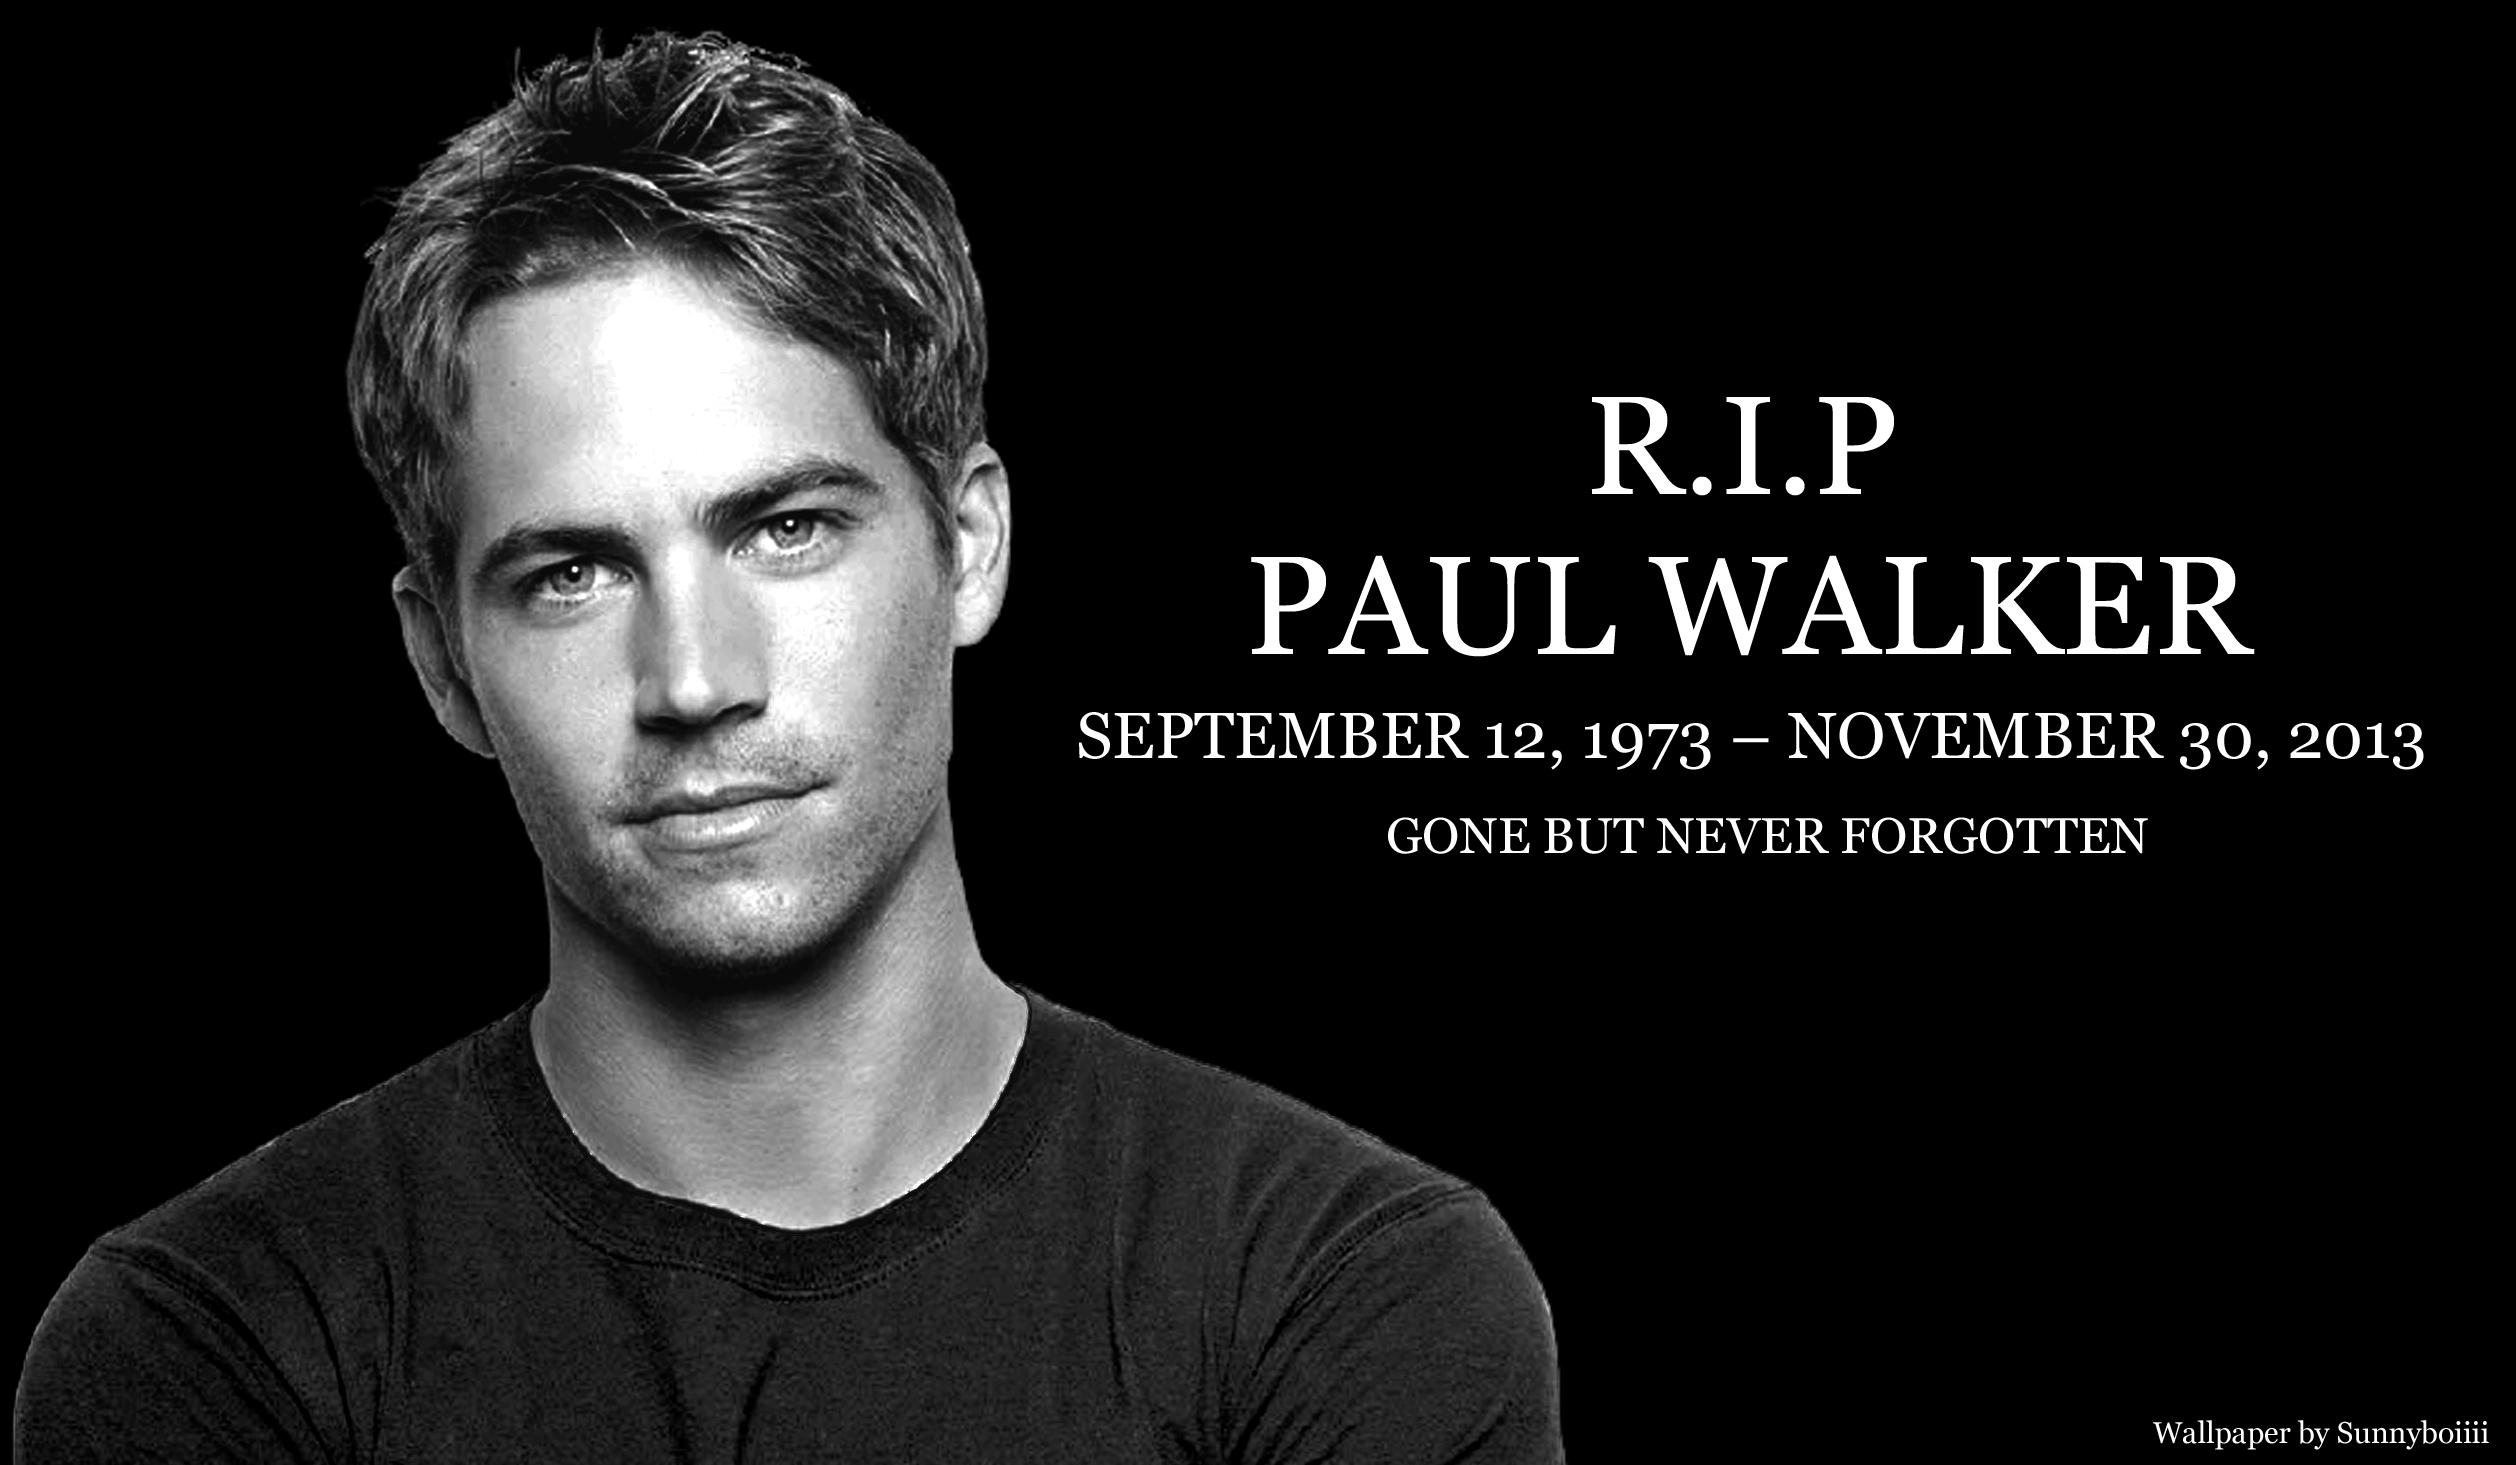 Paul Walker Wallpaper Image Photo Picture Background